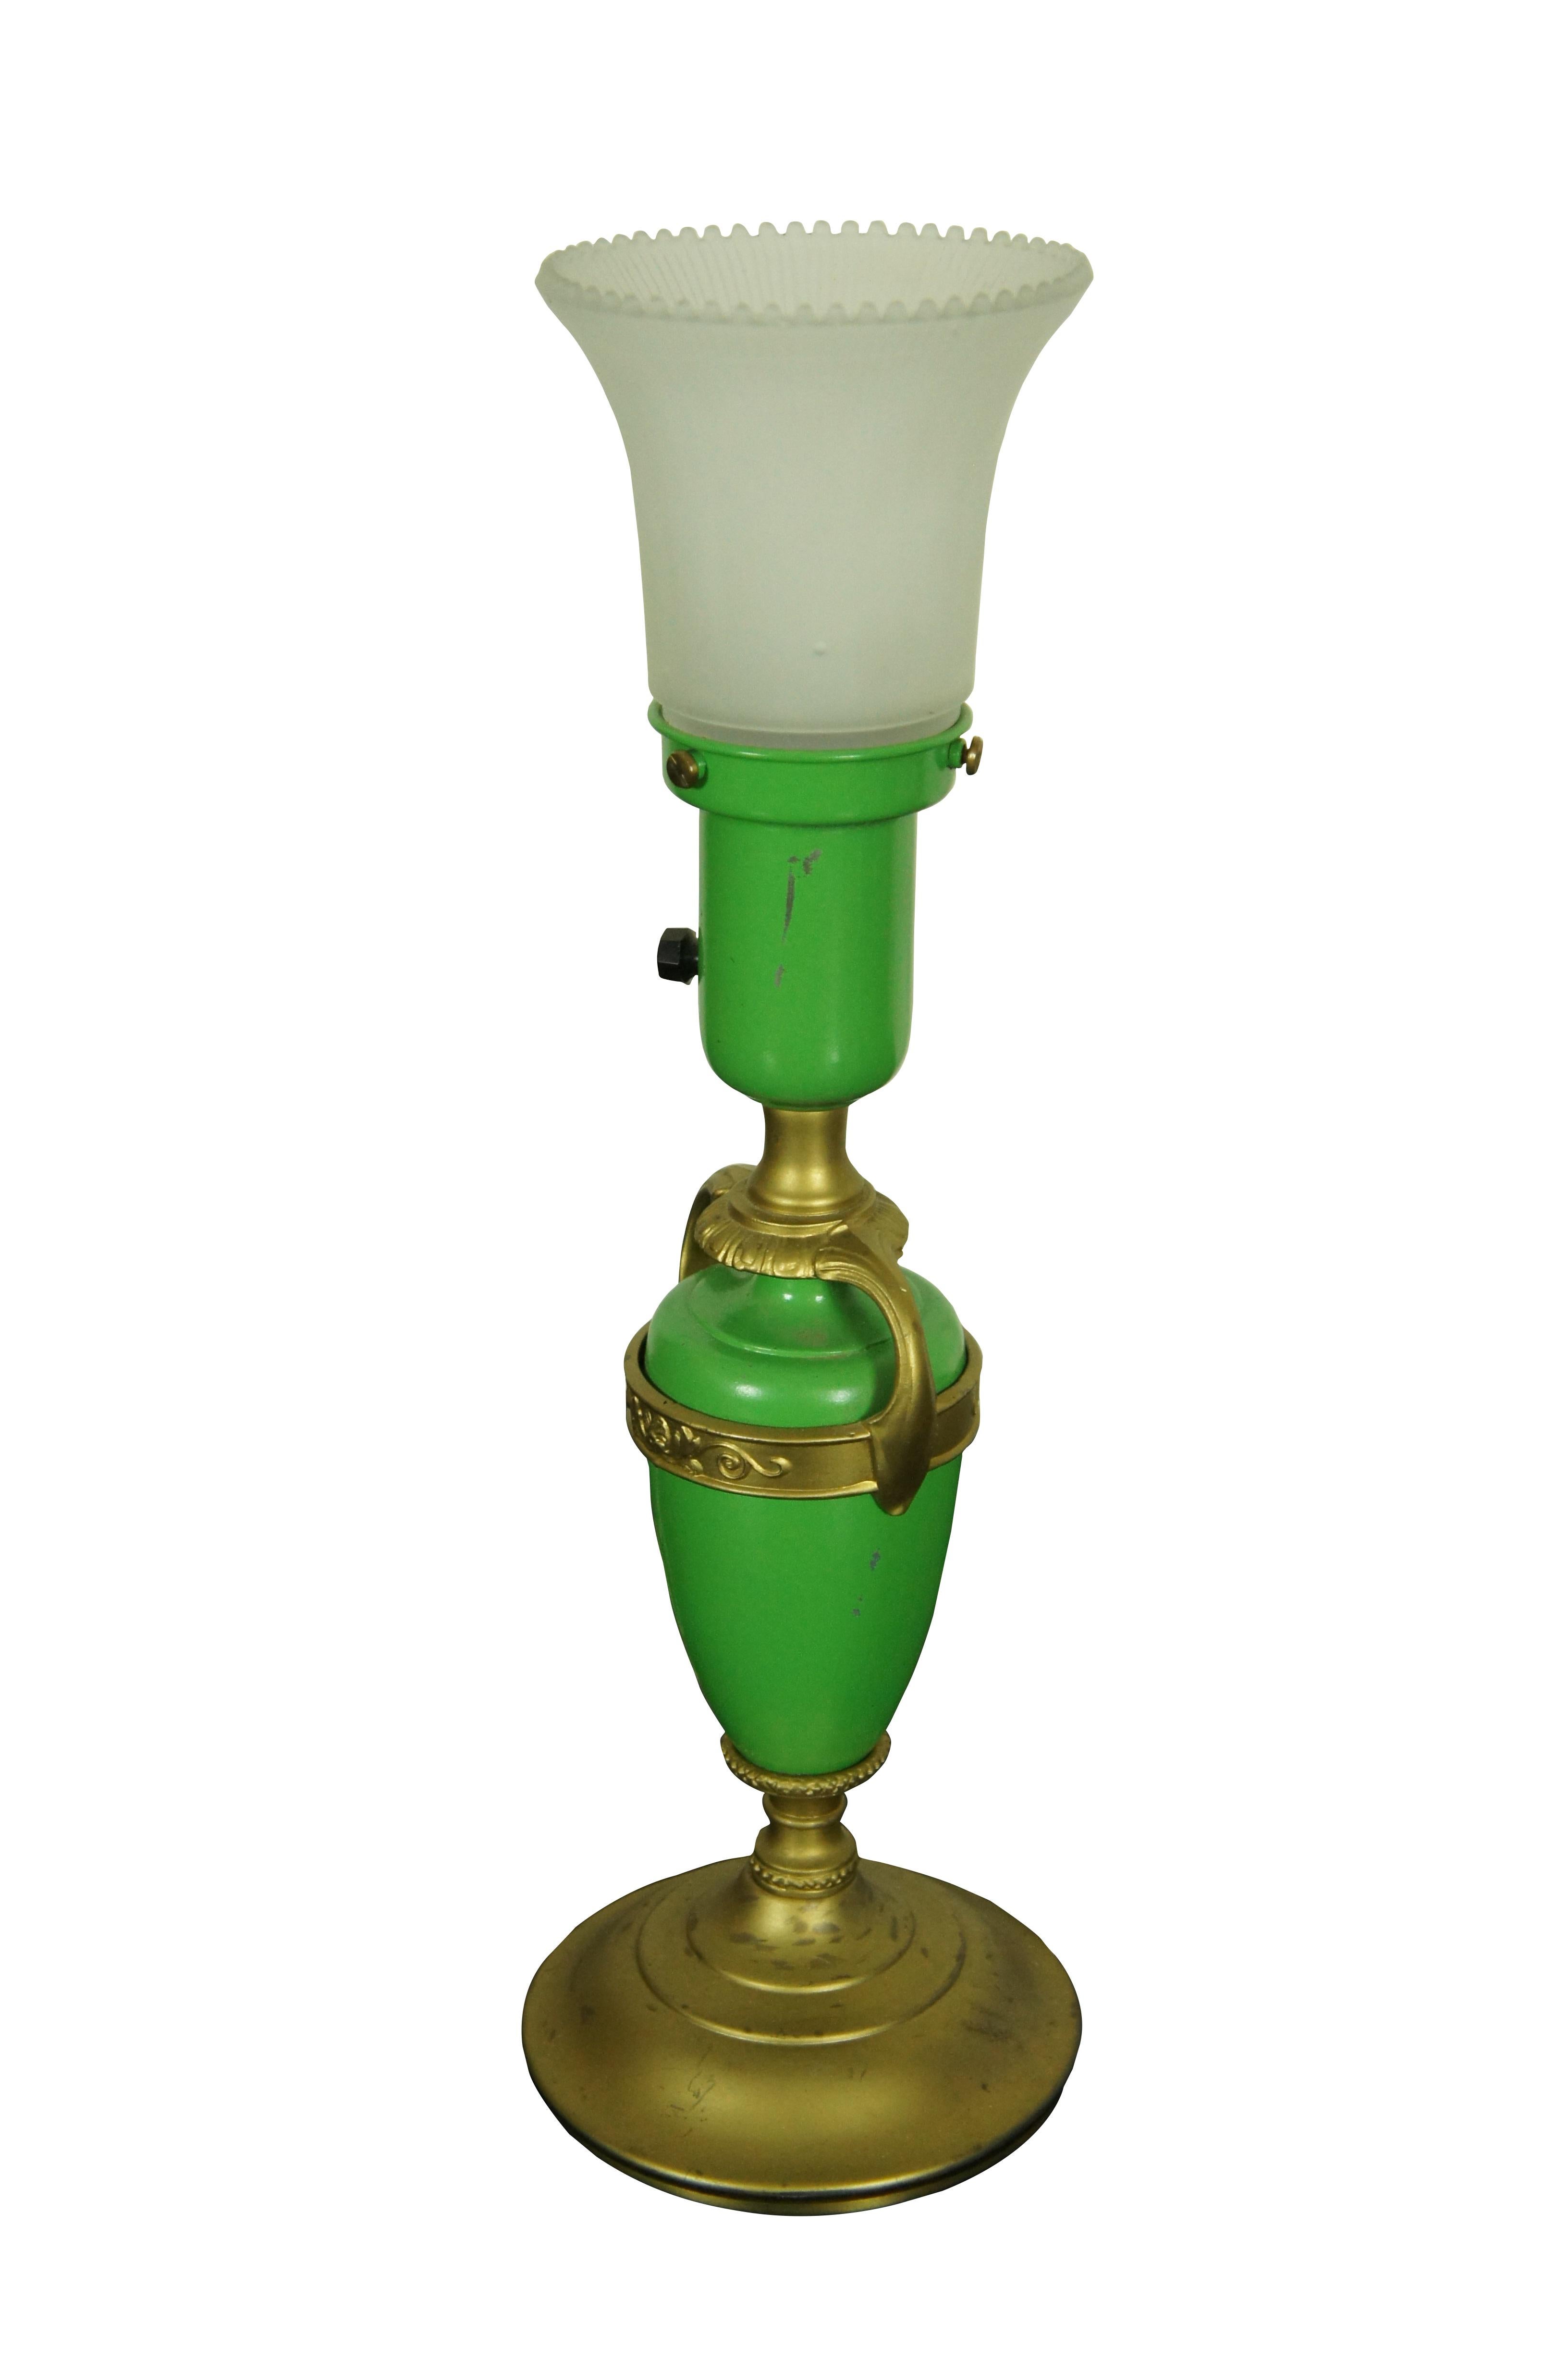 Antique Artistic Brass & Bronze Works NYC budoir / library / office lamp featuring Art Deco styling with torchiere style shade and green metal body.

Dimensions:
5.25